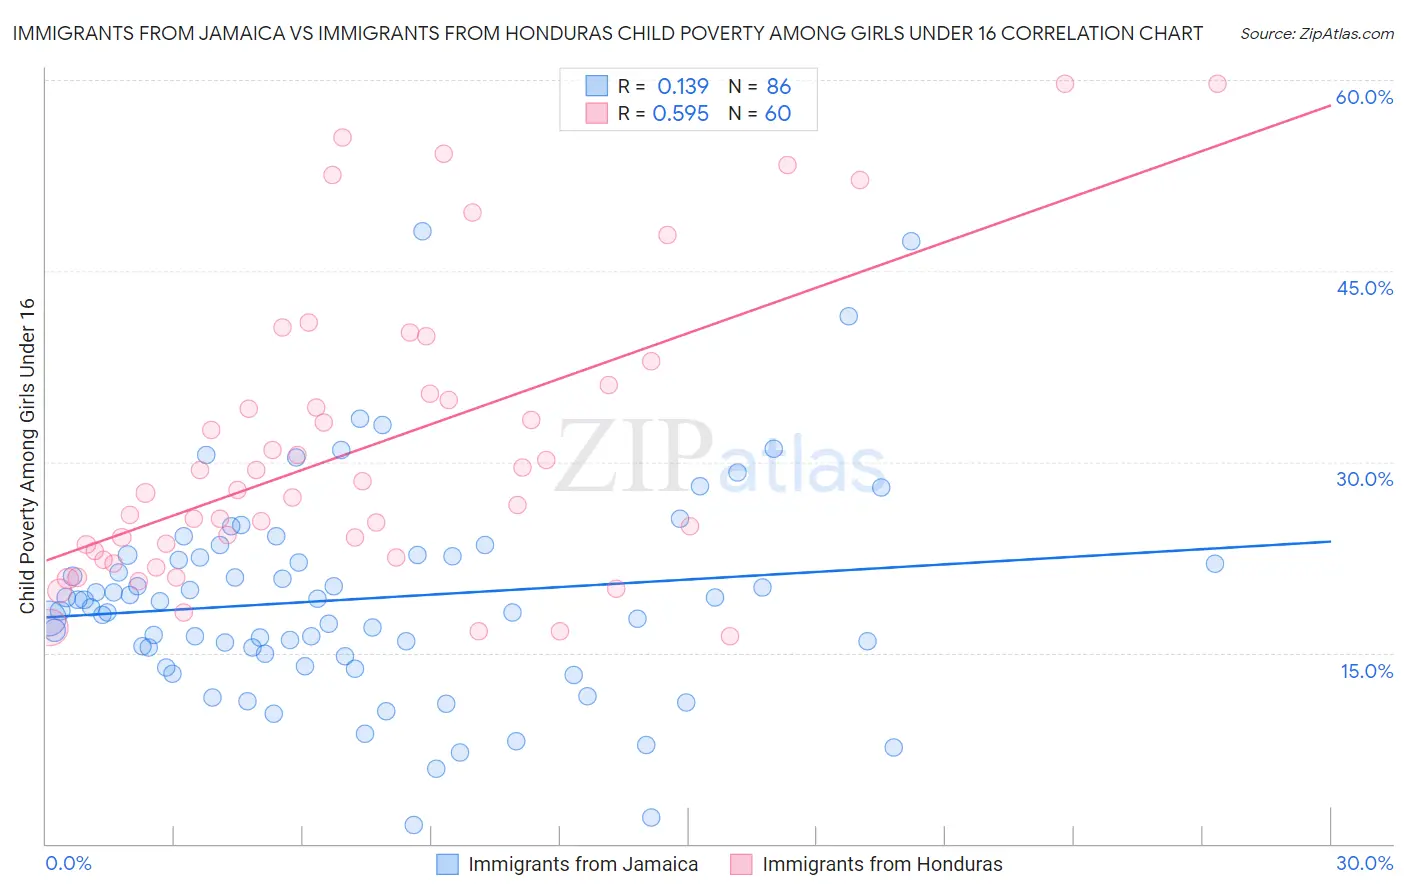 Immigrants from Jamaica vs Immigrants from Honduras Child Poverty Among Girls Under 16